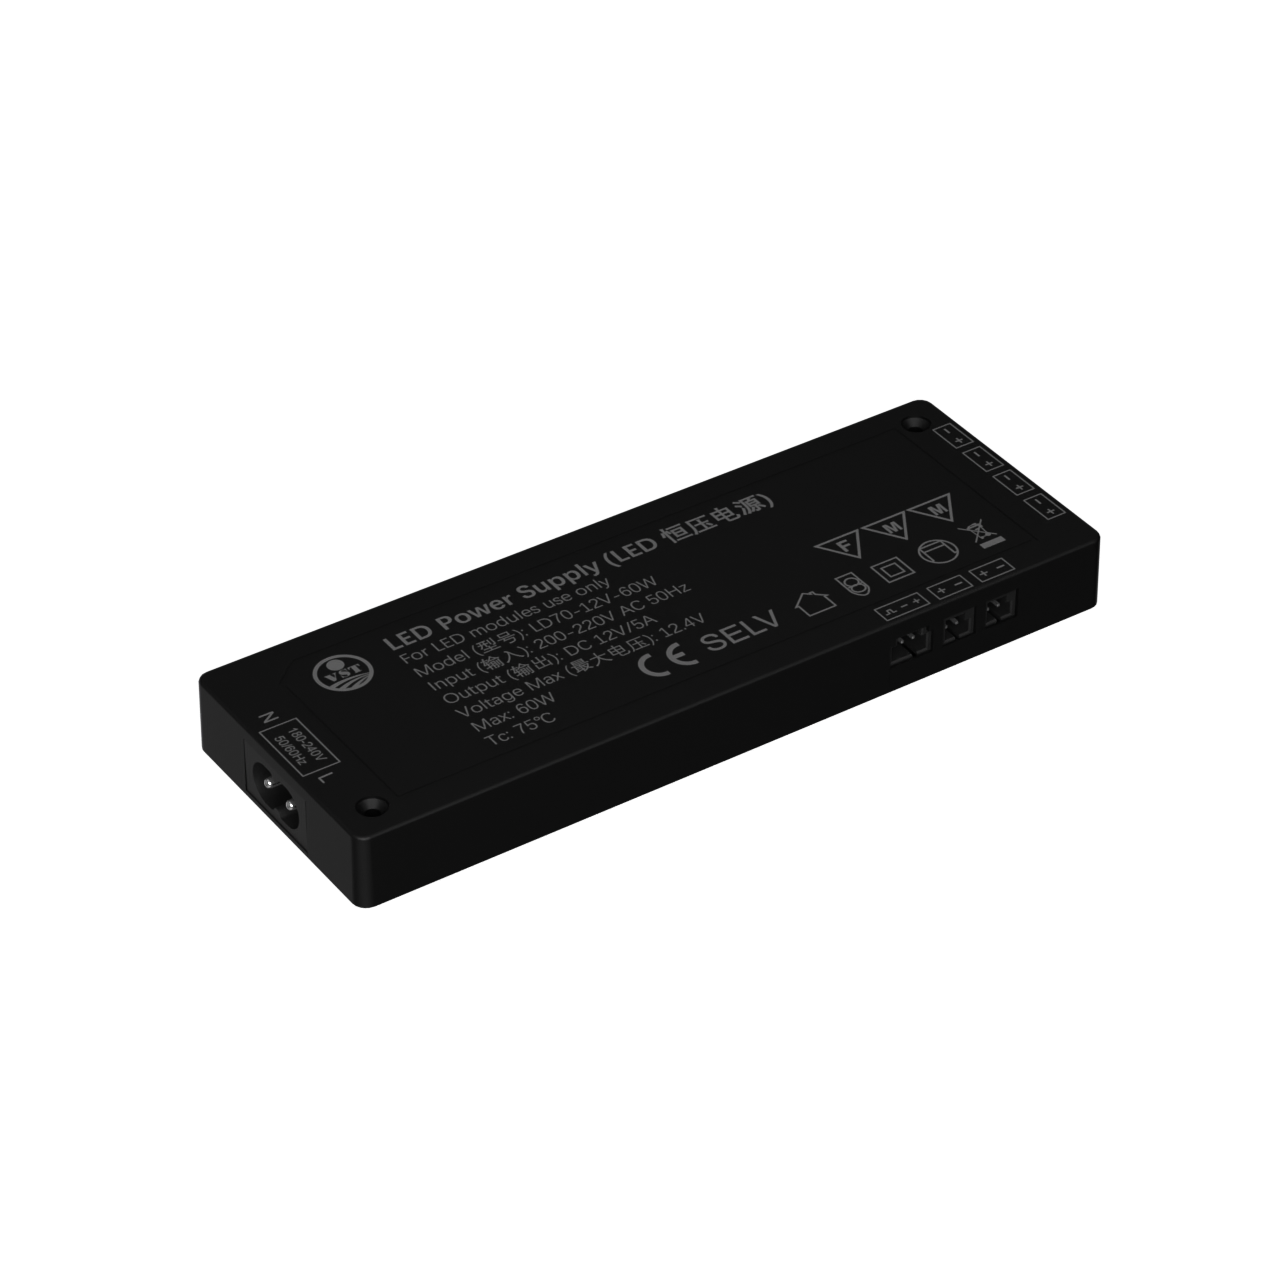 LD70-12V-A Ultra-Thin LED Strip Transformer 45W Constant Current LED Power Supply with CCC for Strip Lights, Puck Lights 170*60*16mm